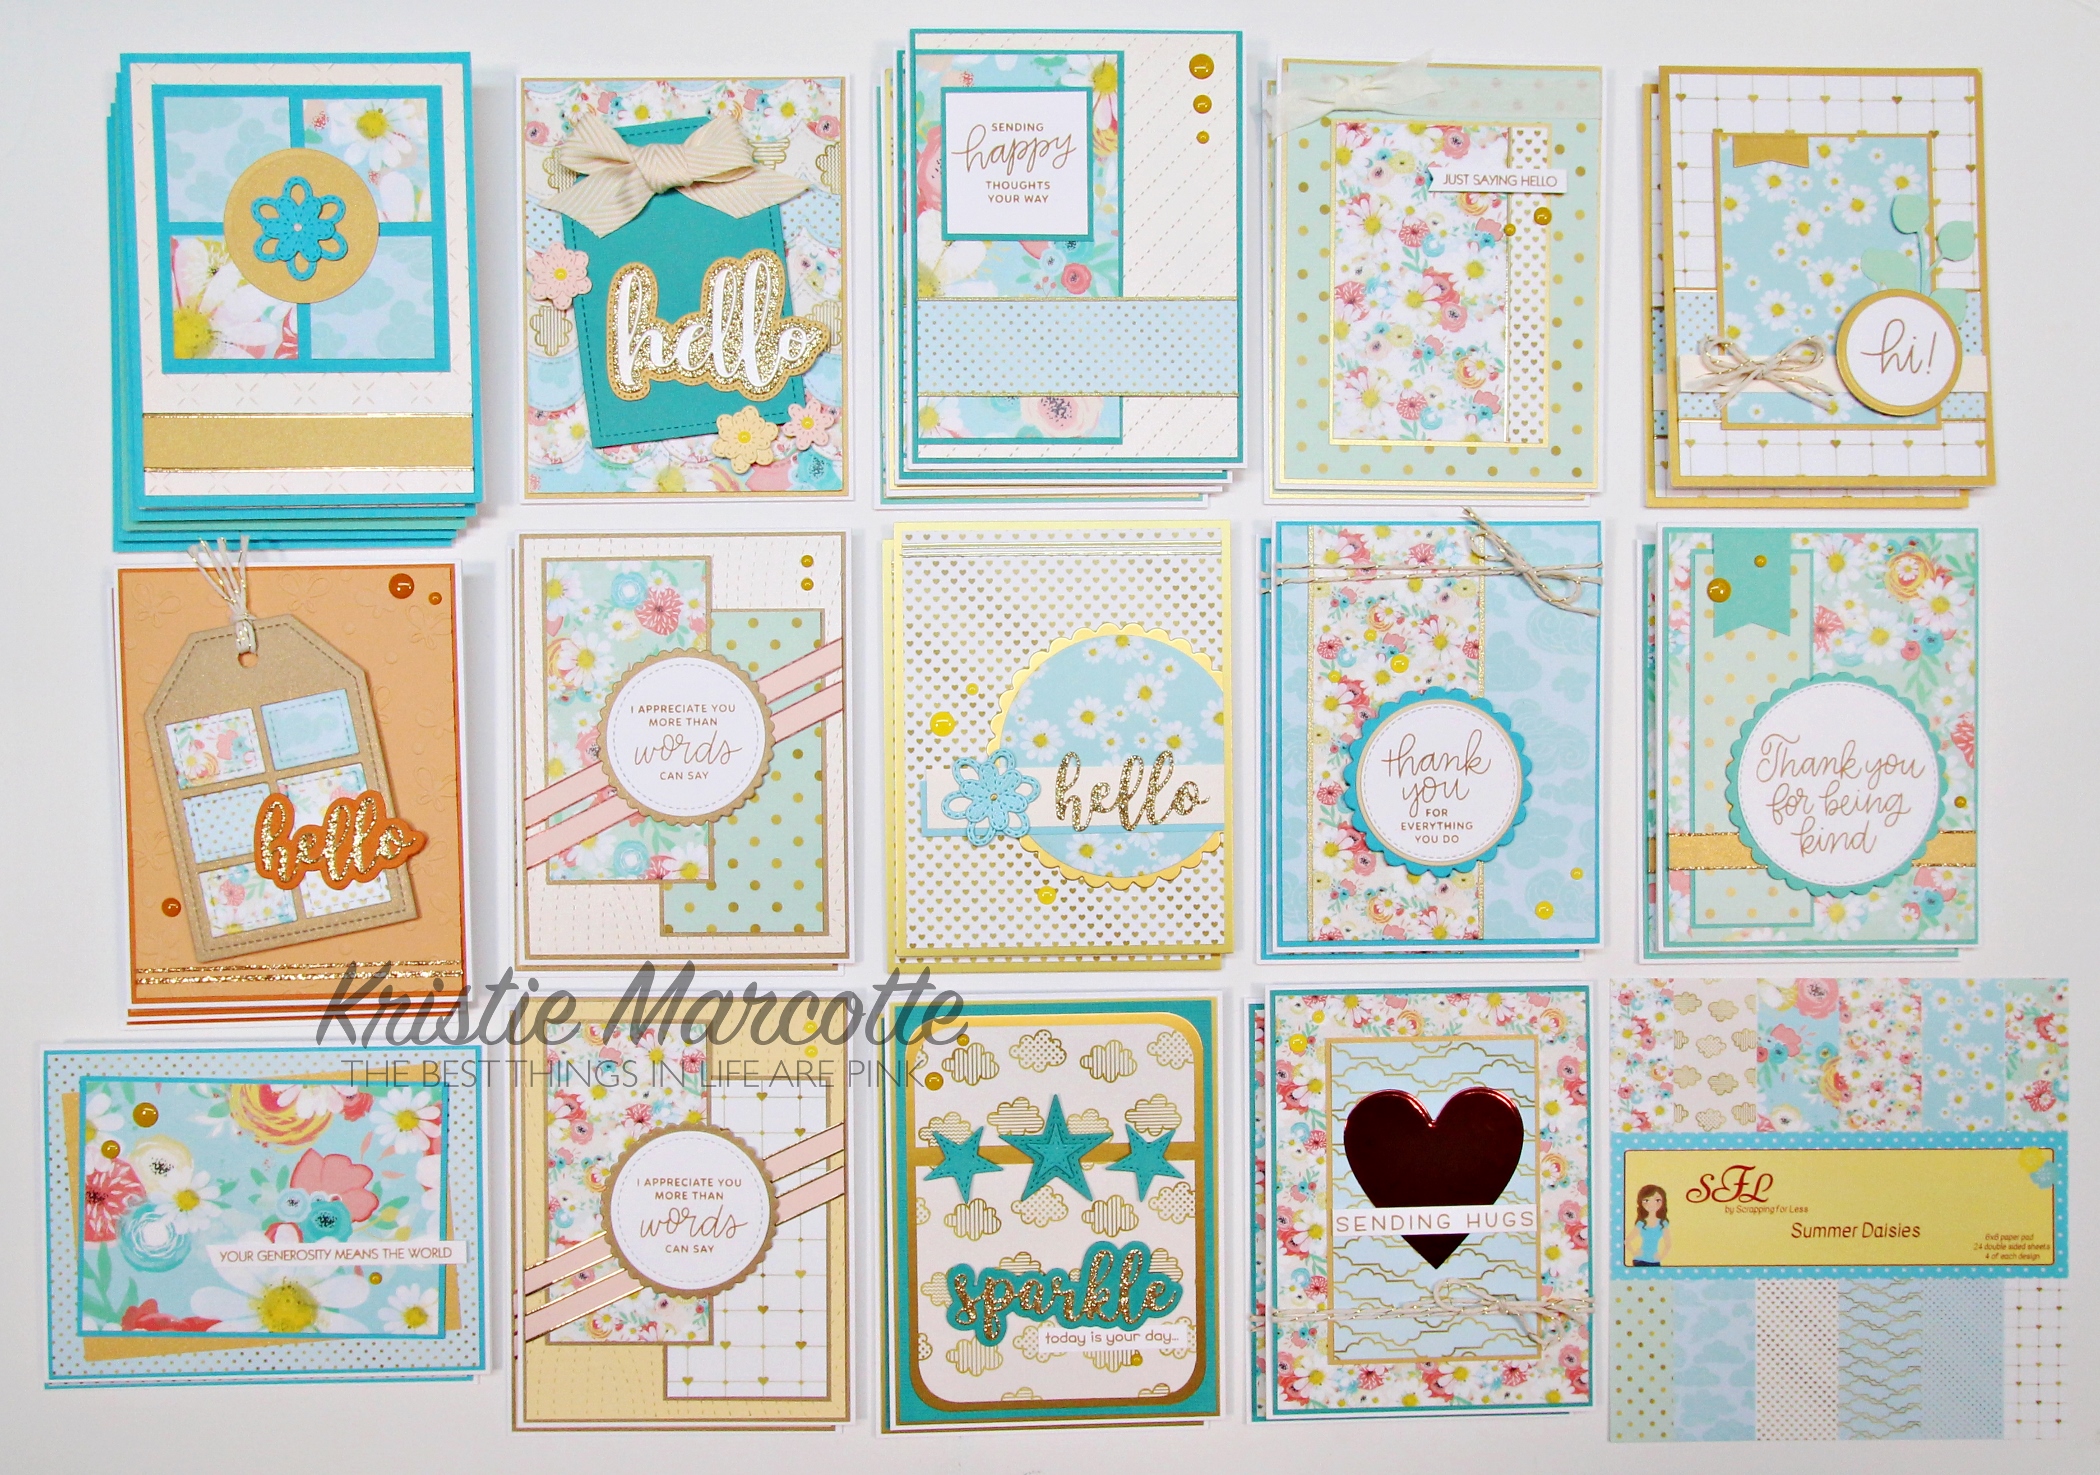 Scrapping for Less – Summer Daisies – 33 cards from one 6×6 paper pad